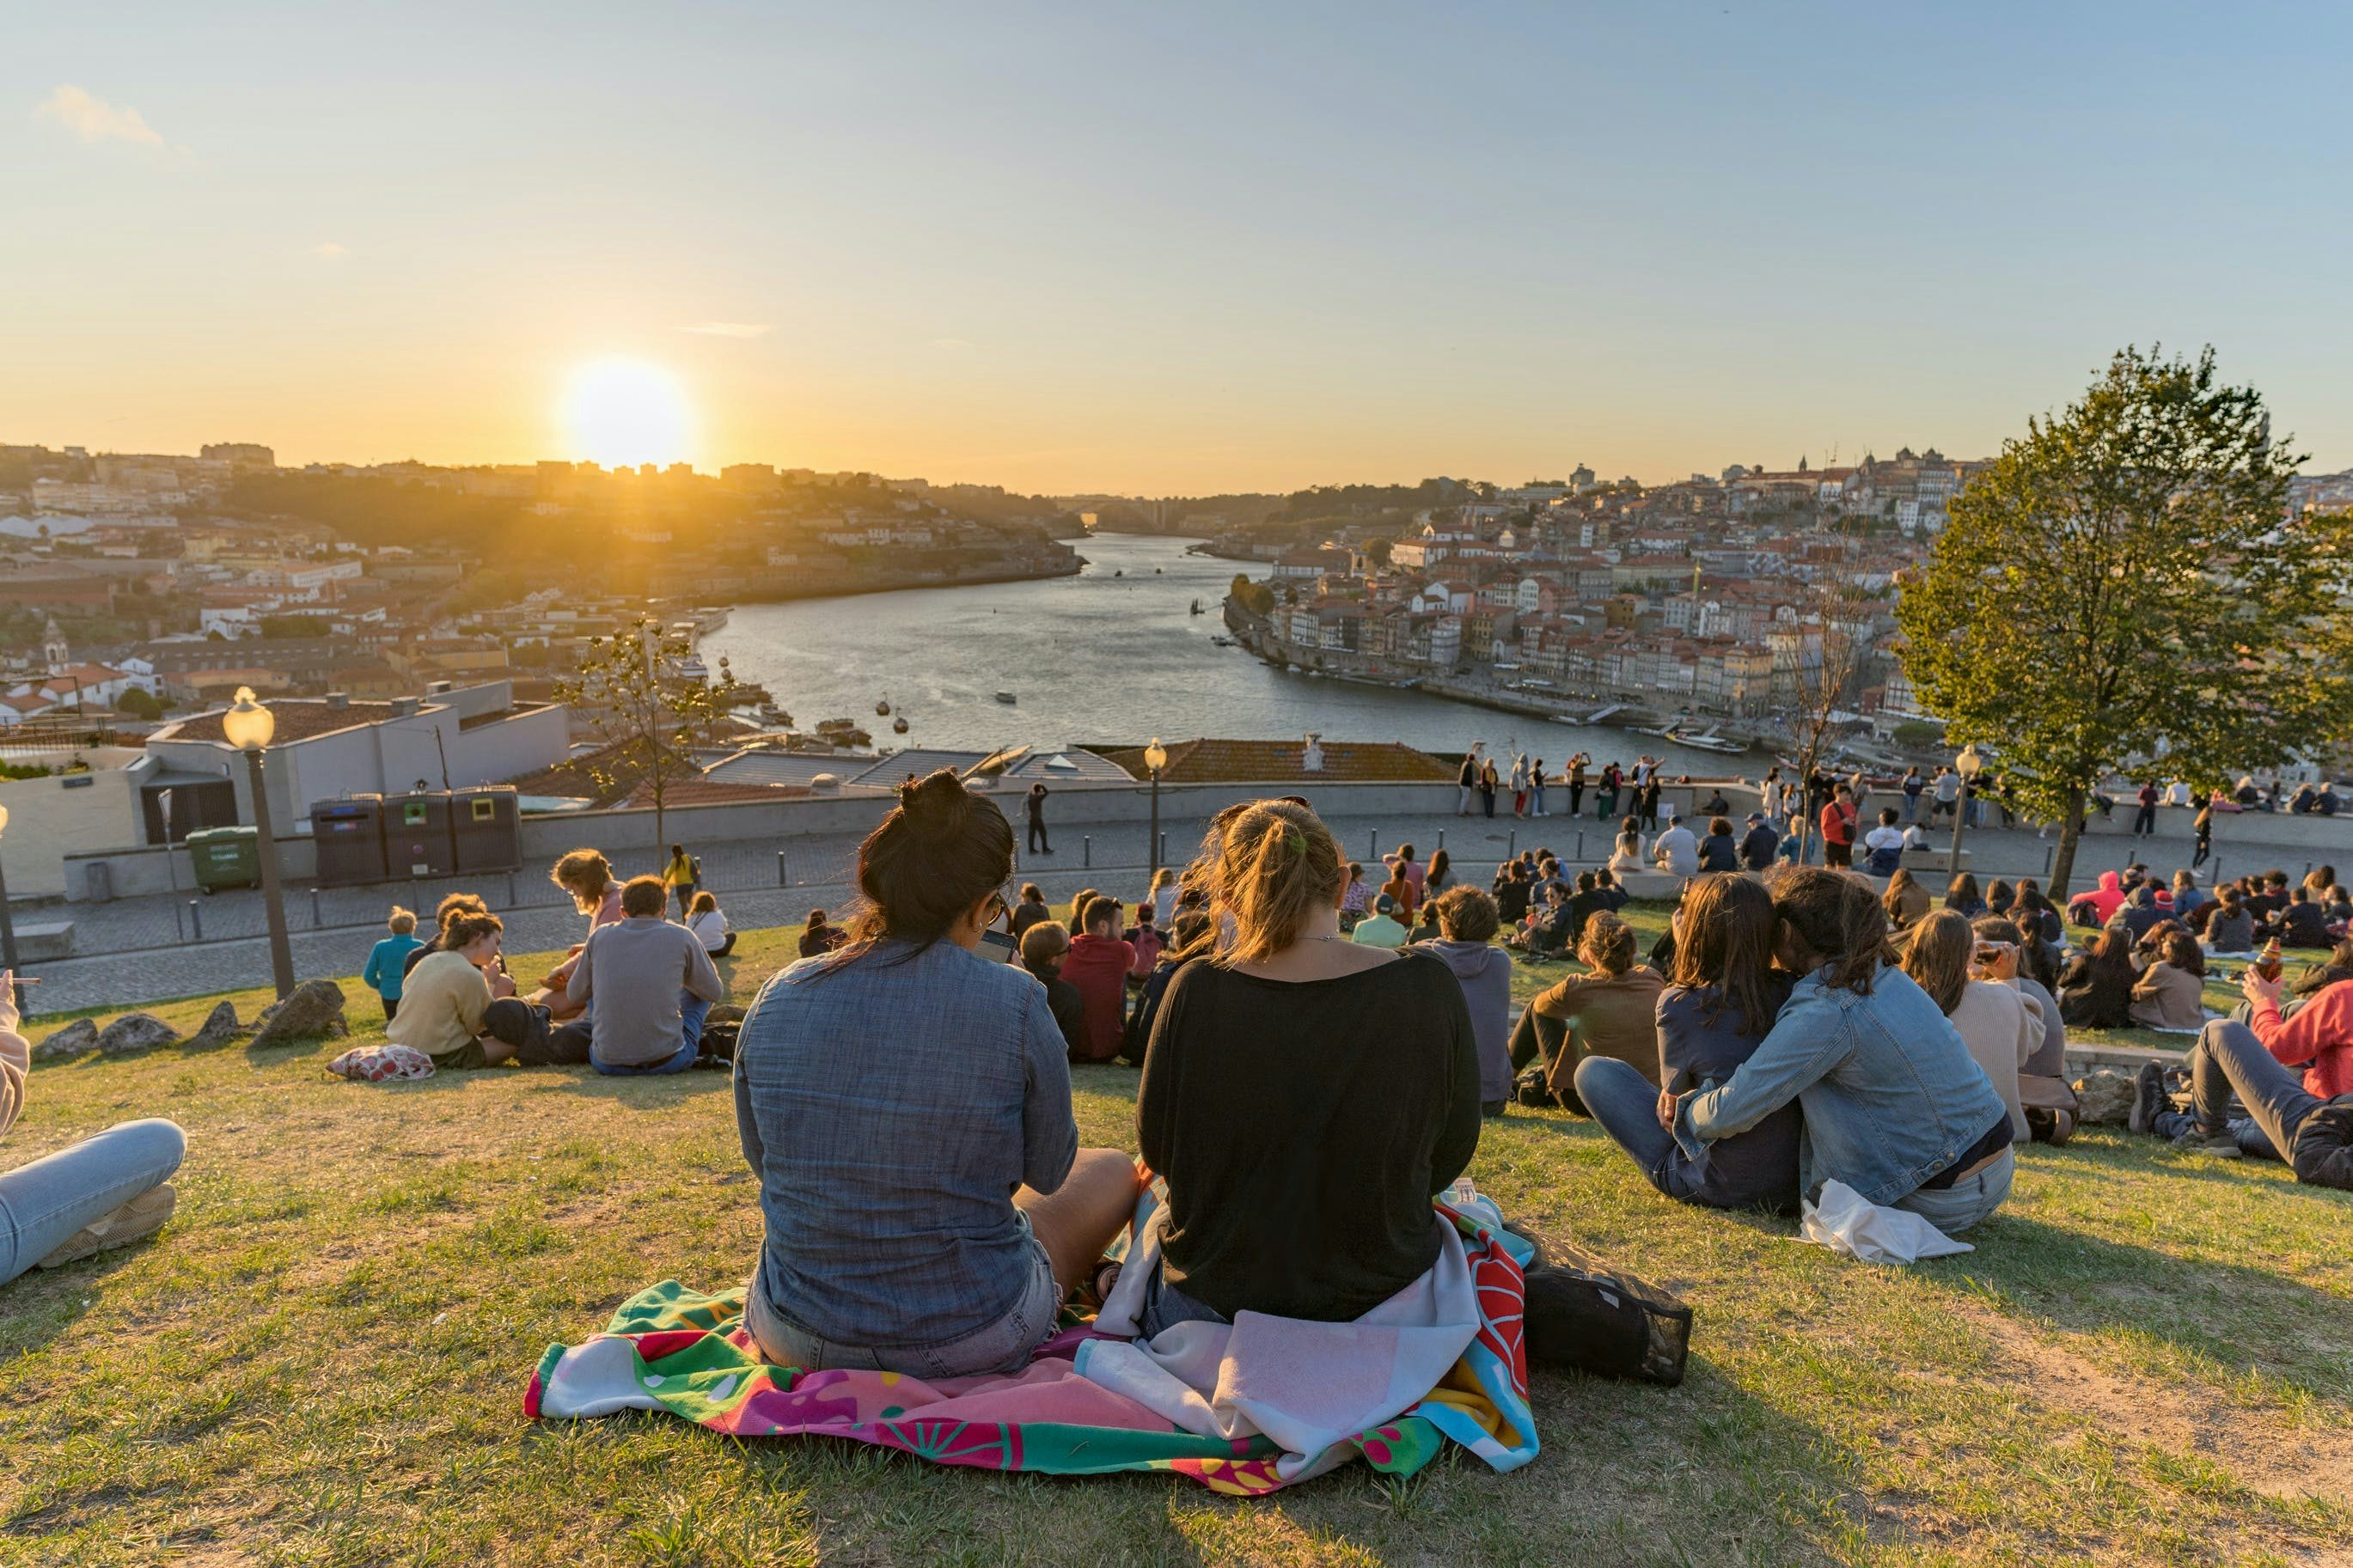 An image of people on rugs on the grass overlooking a city and river